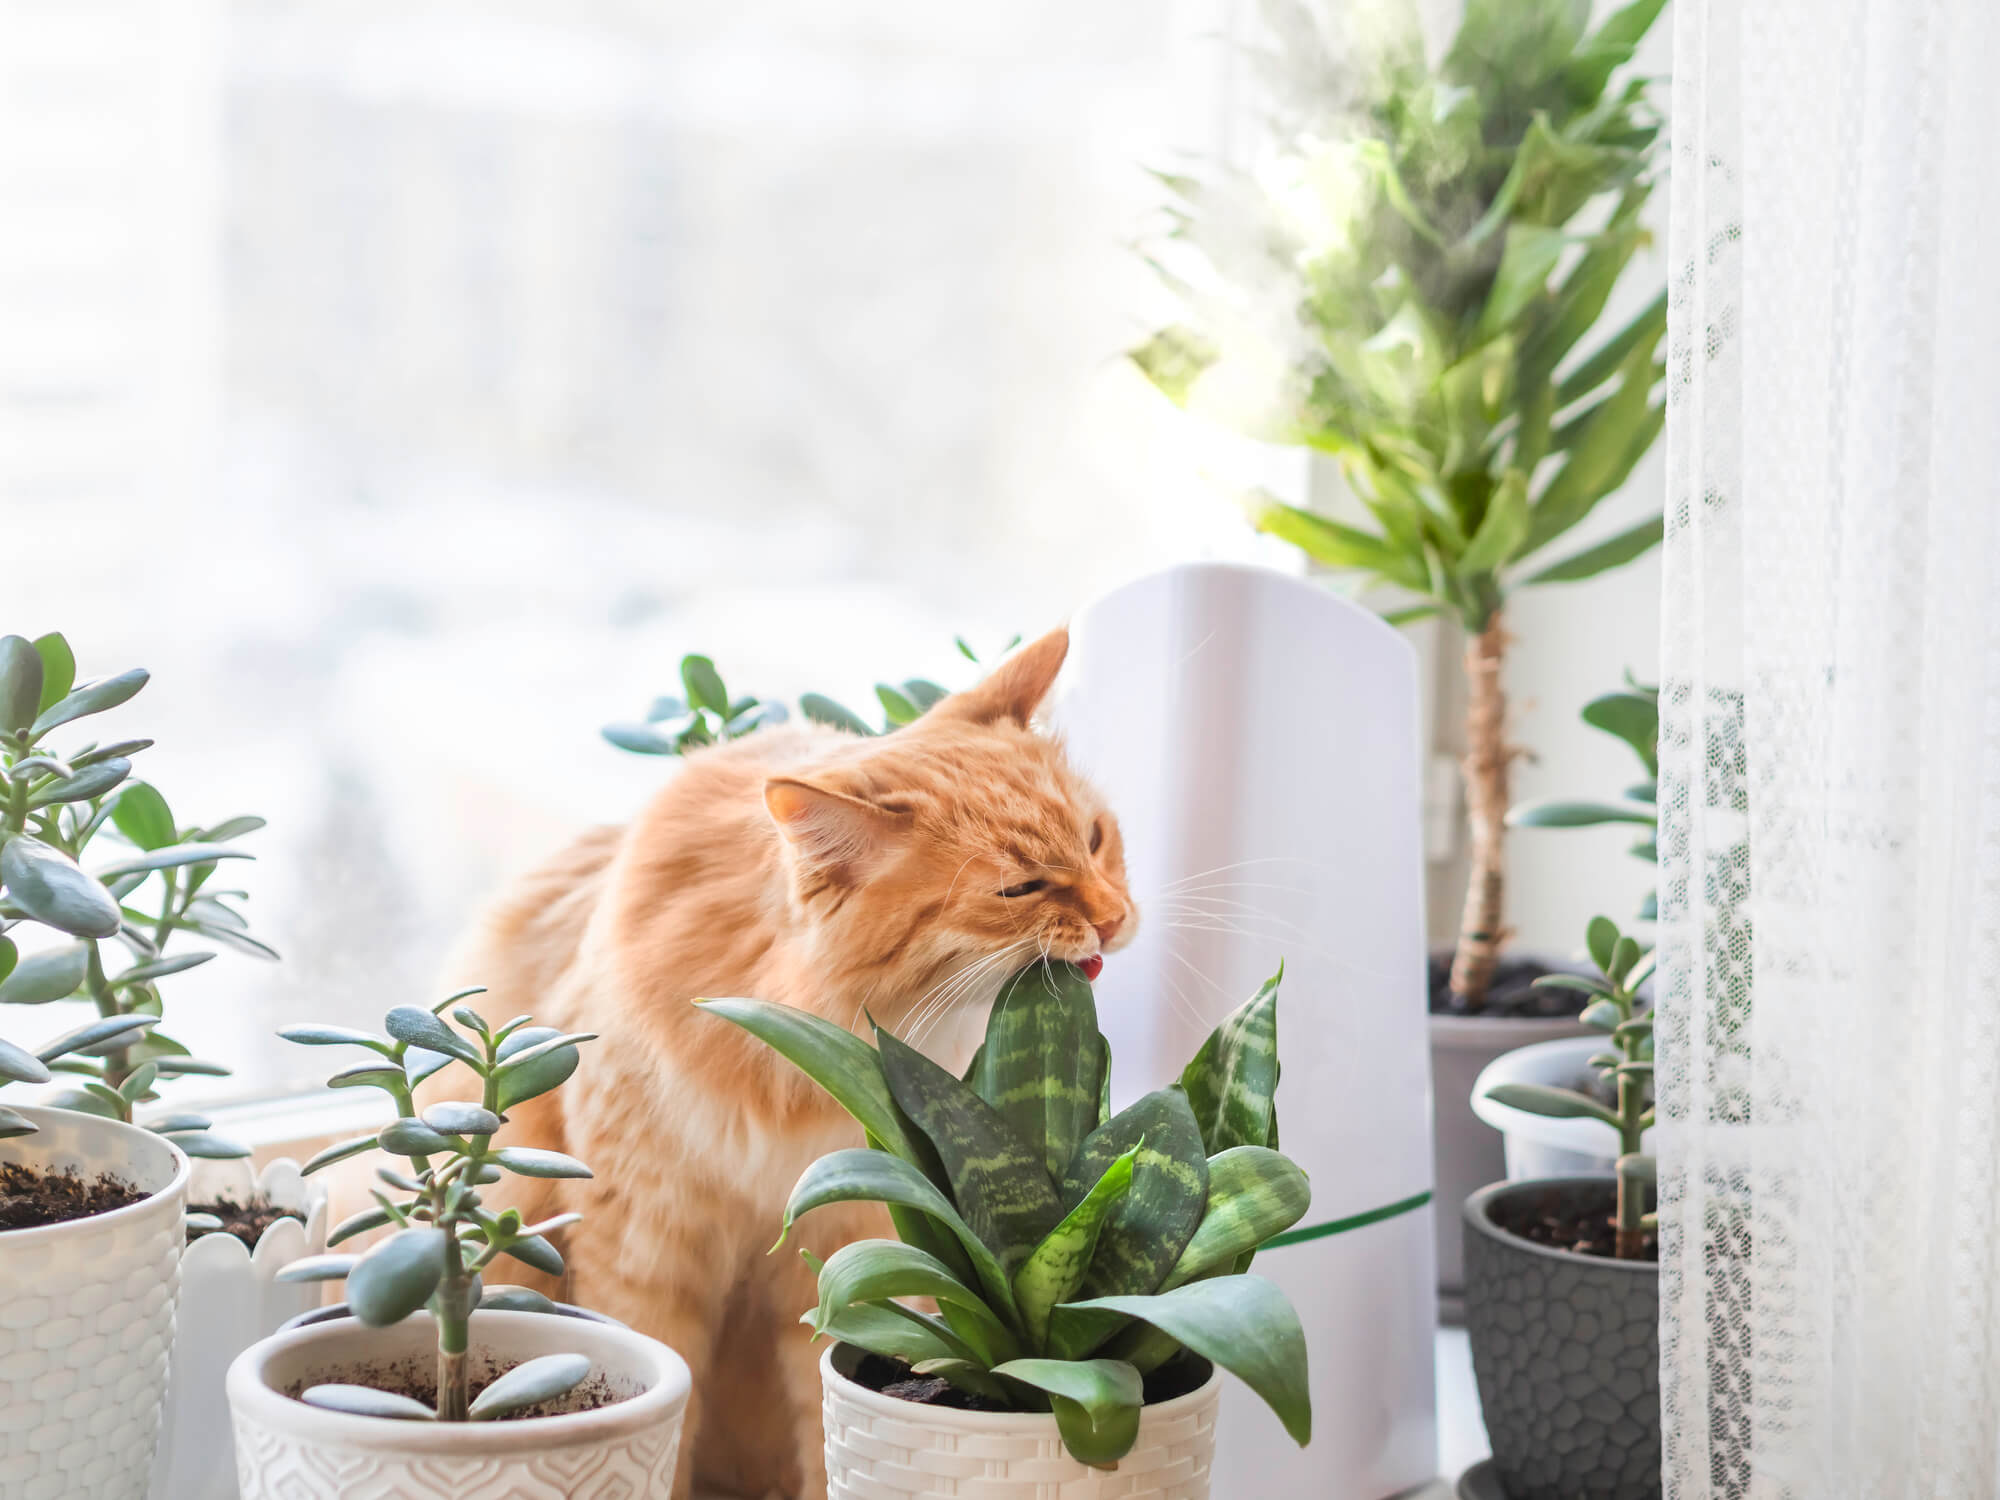 An orange cat bites a succulent plant leaf on a windowsill. A humidifier is visible in the background to put more moisture in the air.